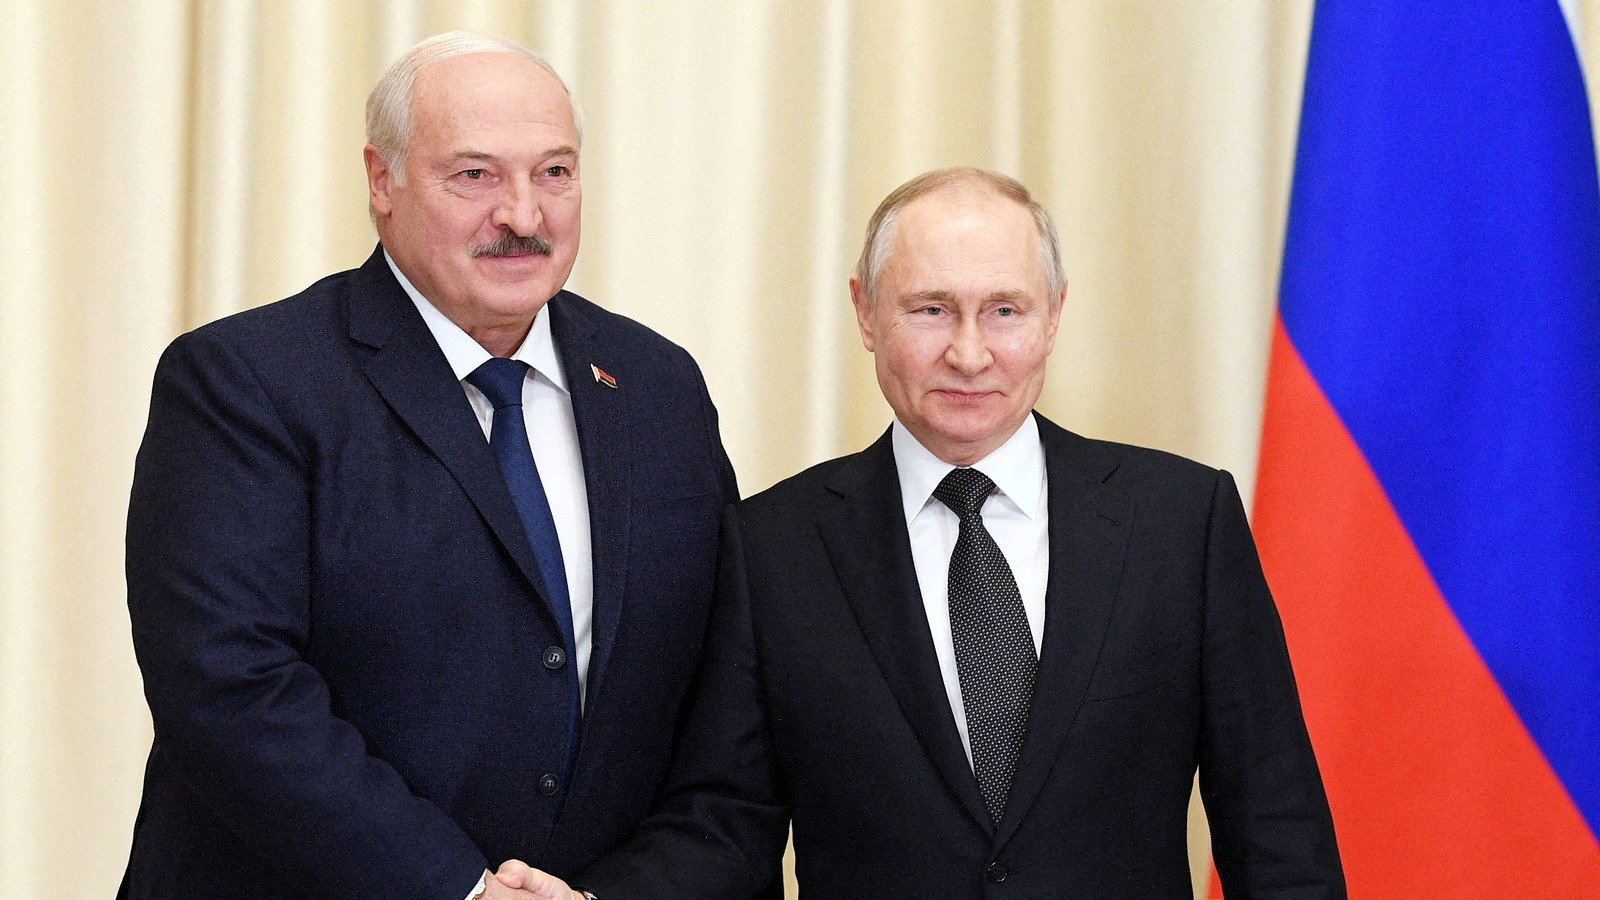 Belarusian President Alexander Lukashenko allowed Russia to stage part of its early offensive in Ukraine from his country./Reuters via third party.